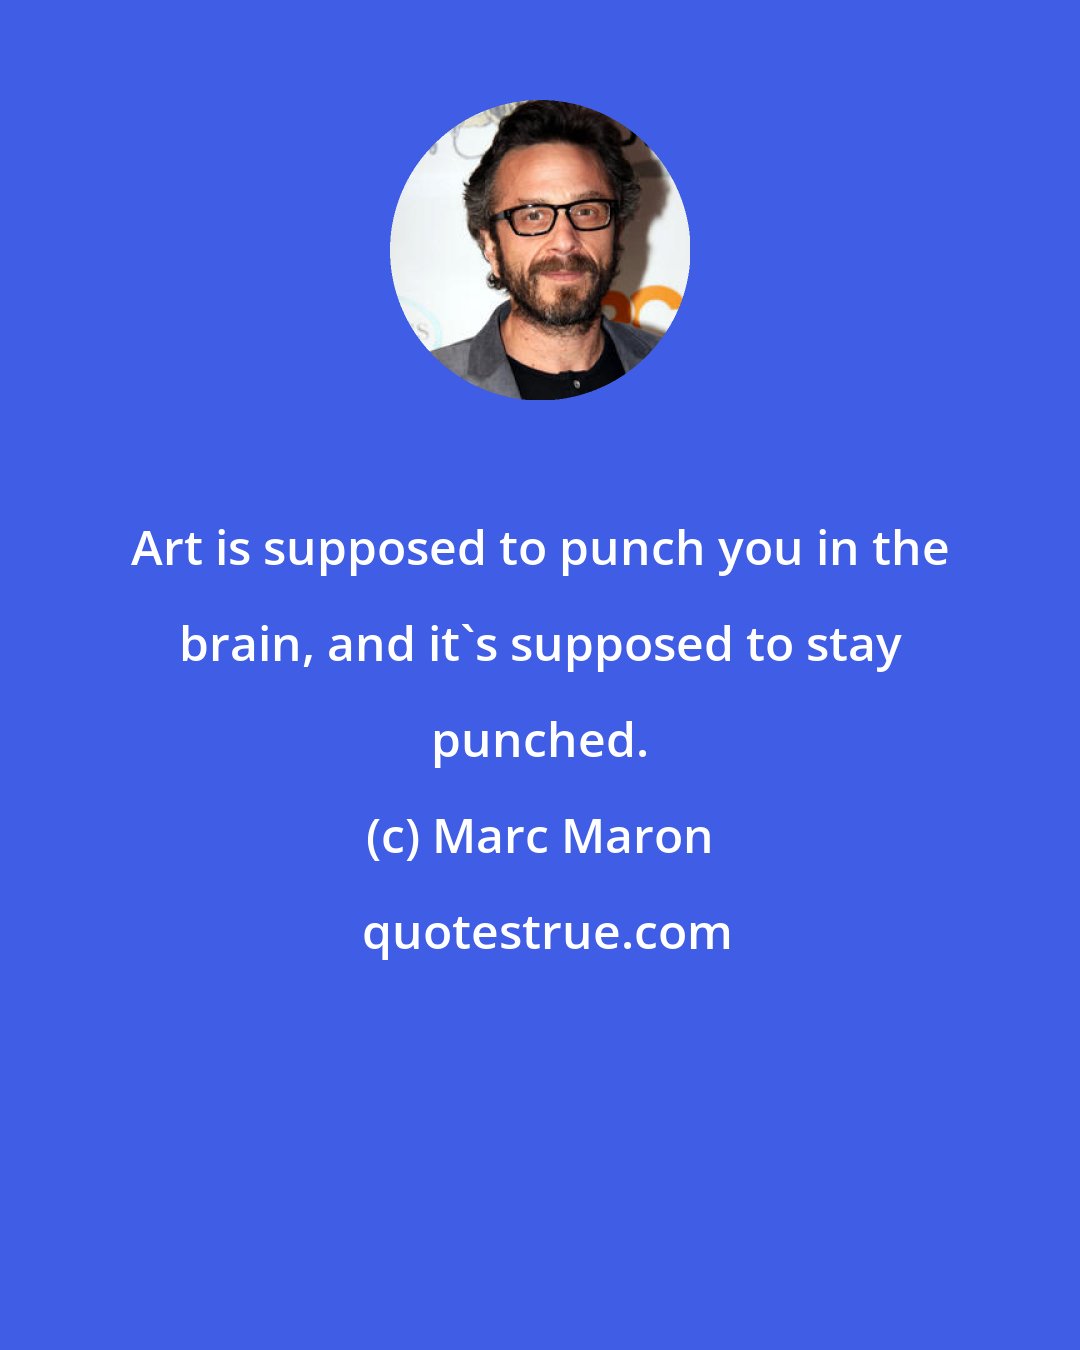 Marc Maron: Art is supposed to punch you in the brain, and it's supposed to stay punched.